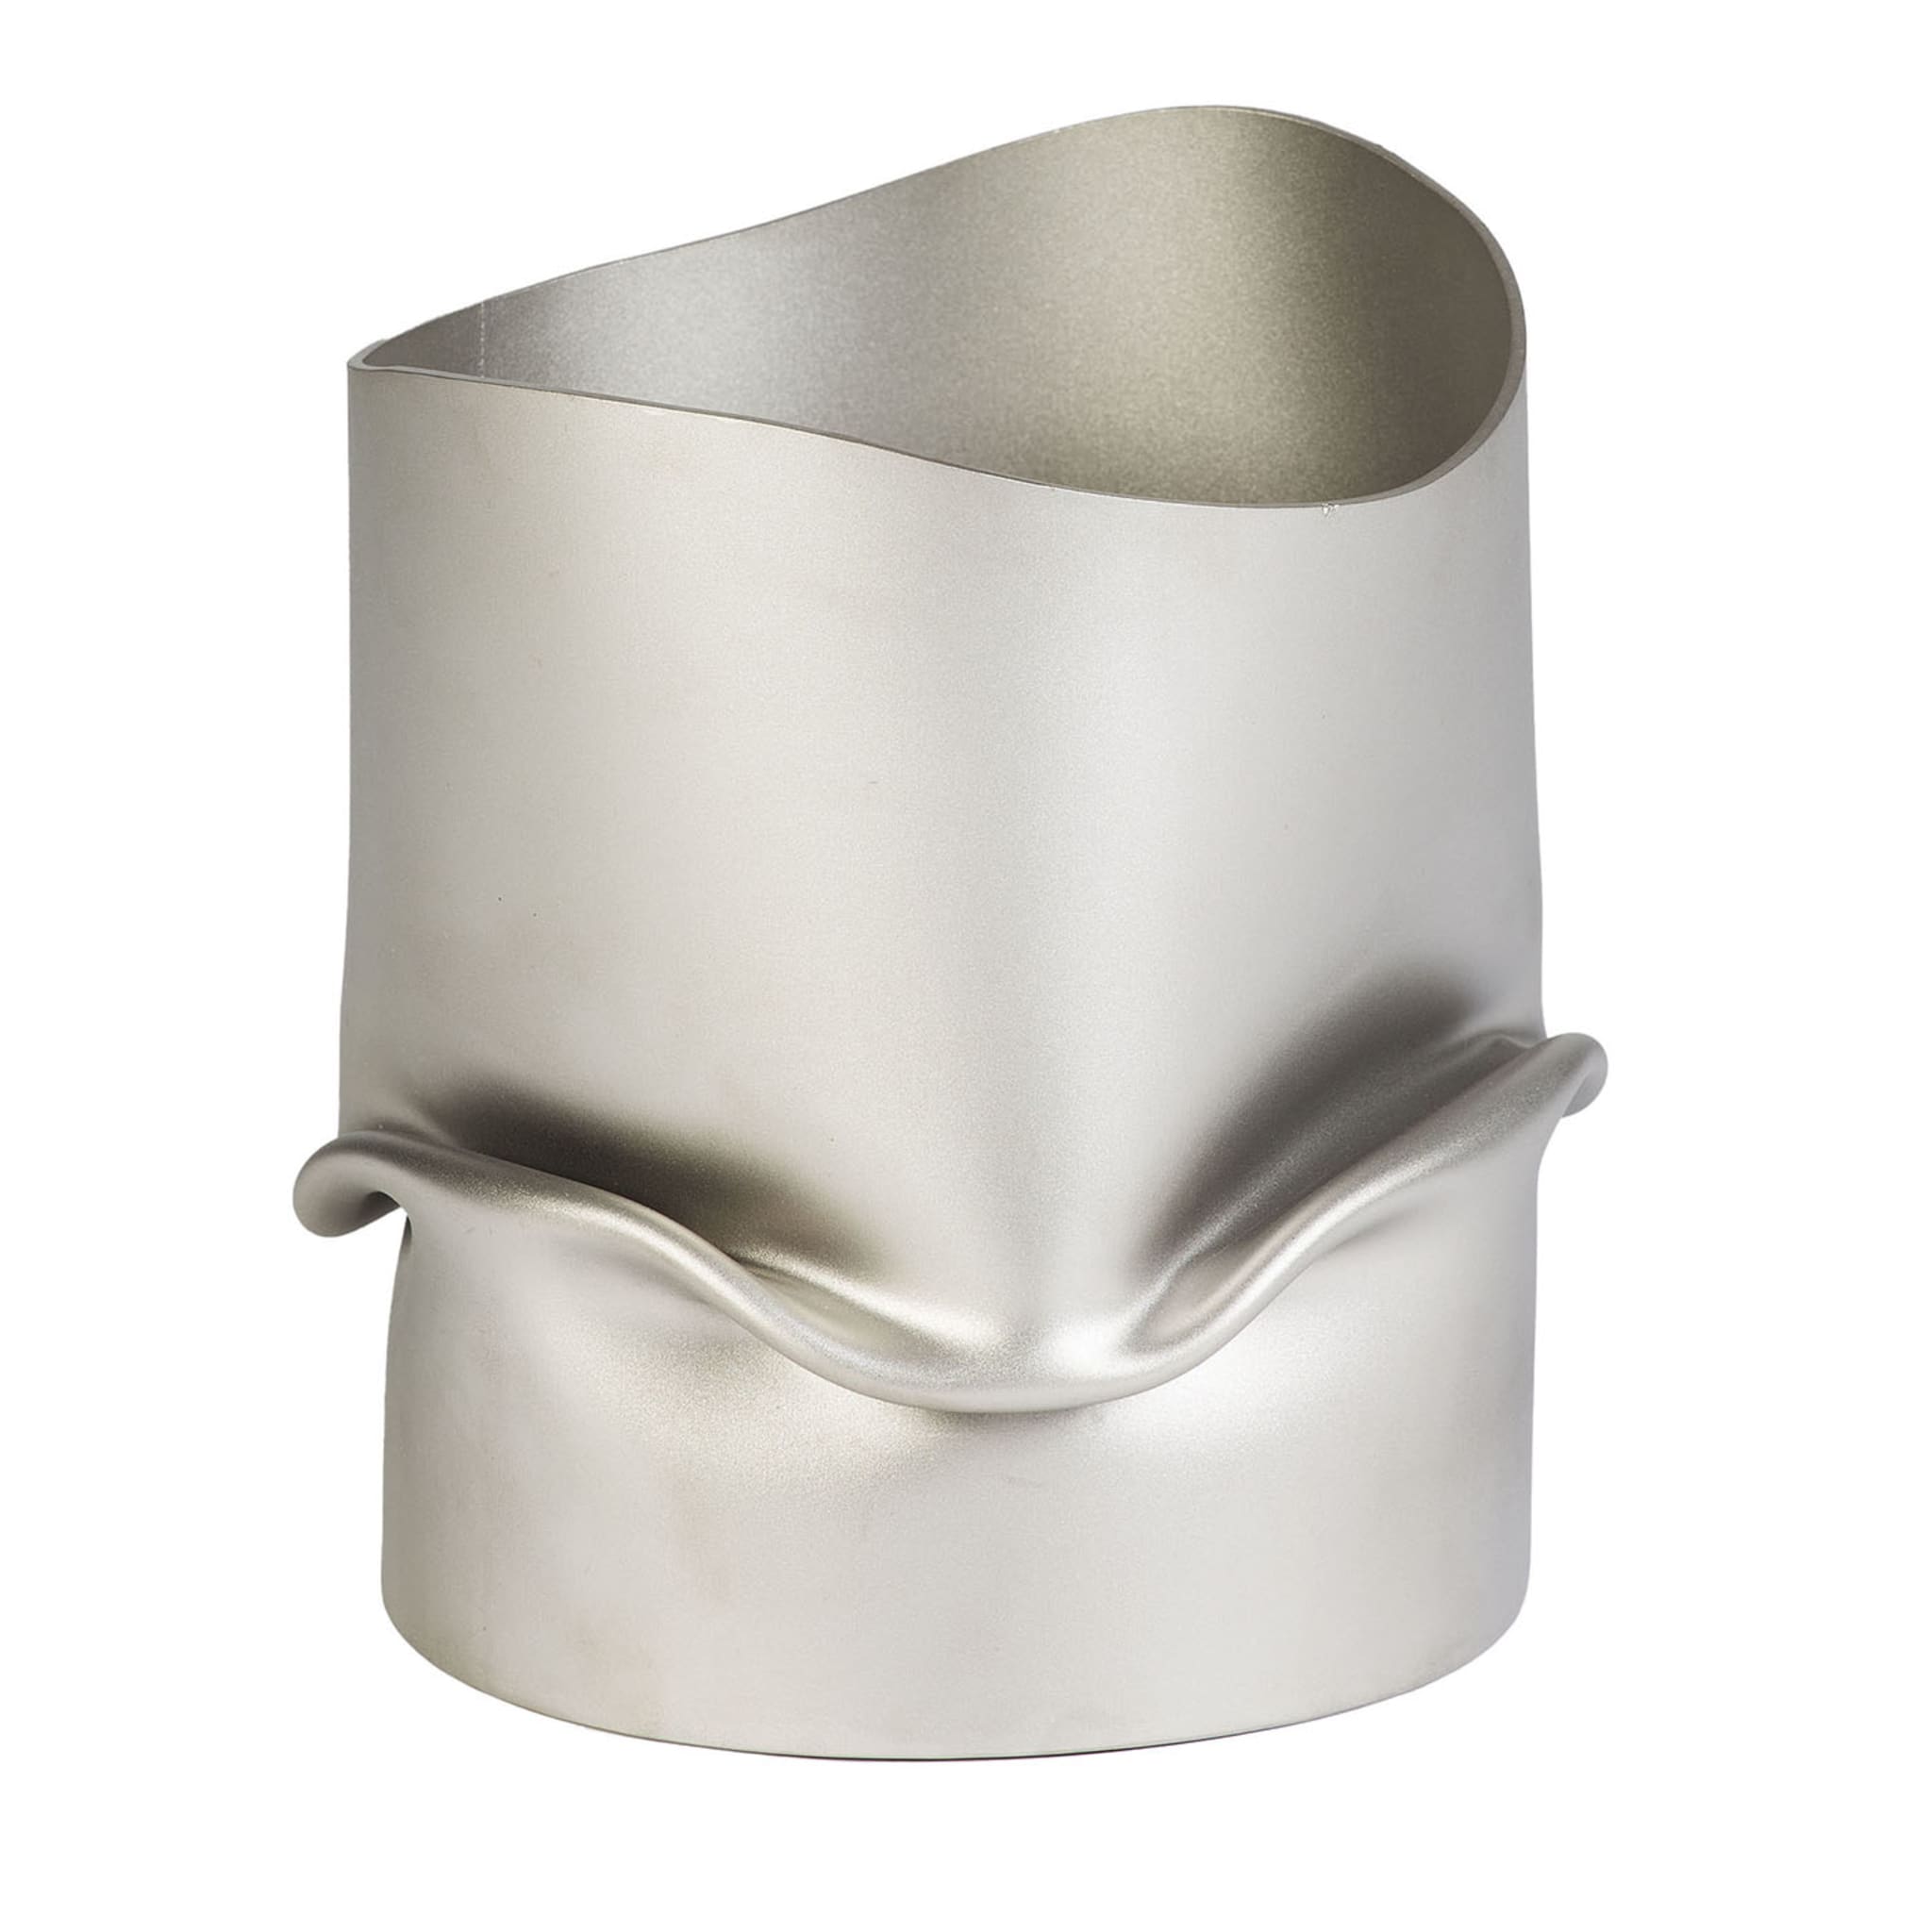 Stainless Steel Ice Bucket #1 - Main view